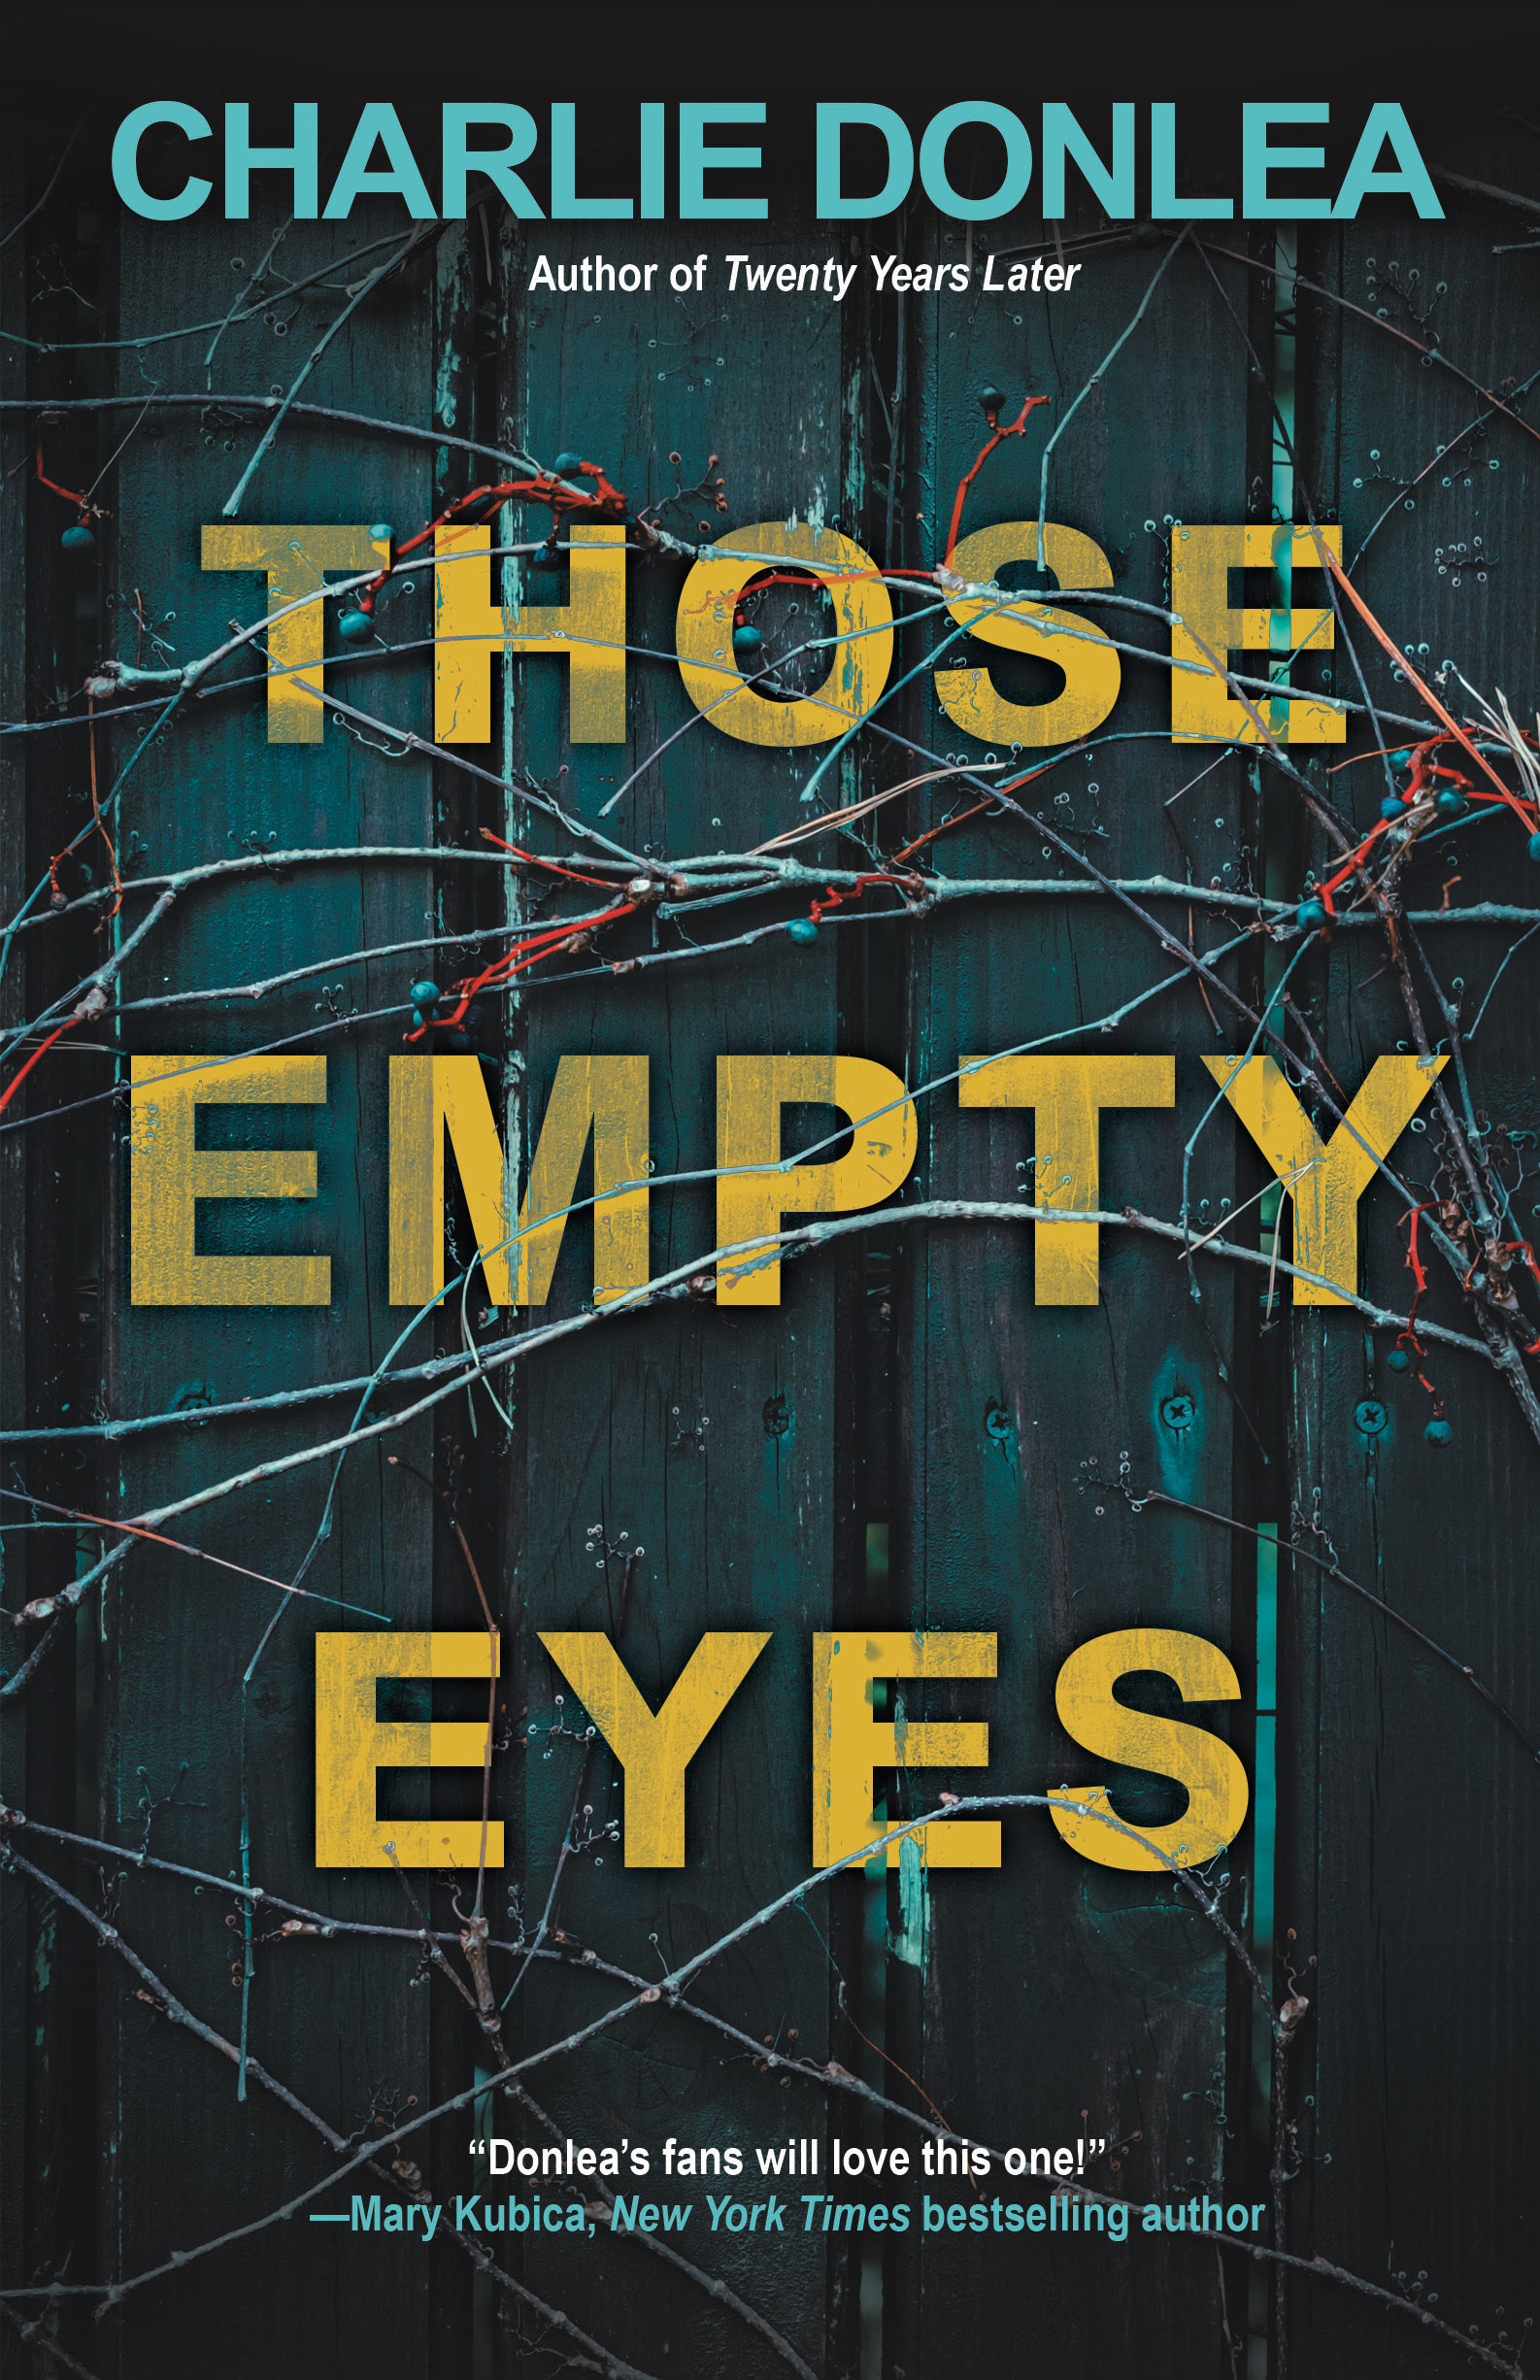 Book cover of Charlie Donlea's novel Those Empty Eyes, dark blue/black background with yellow letters